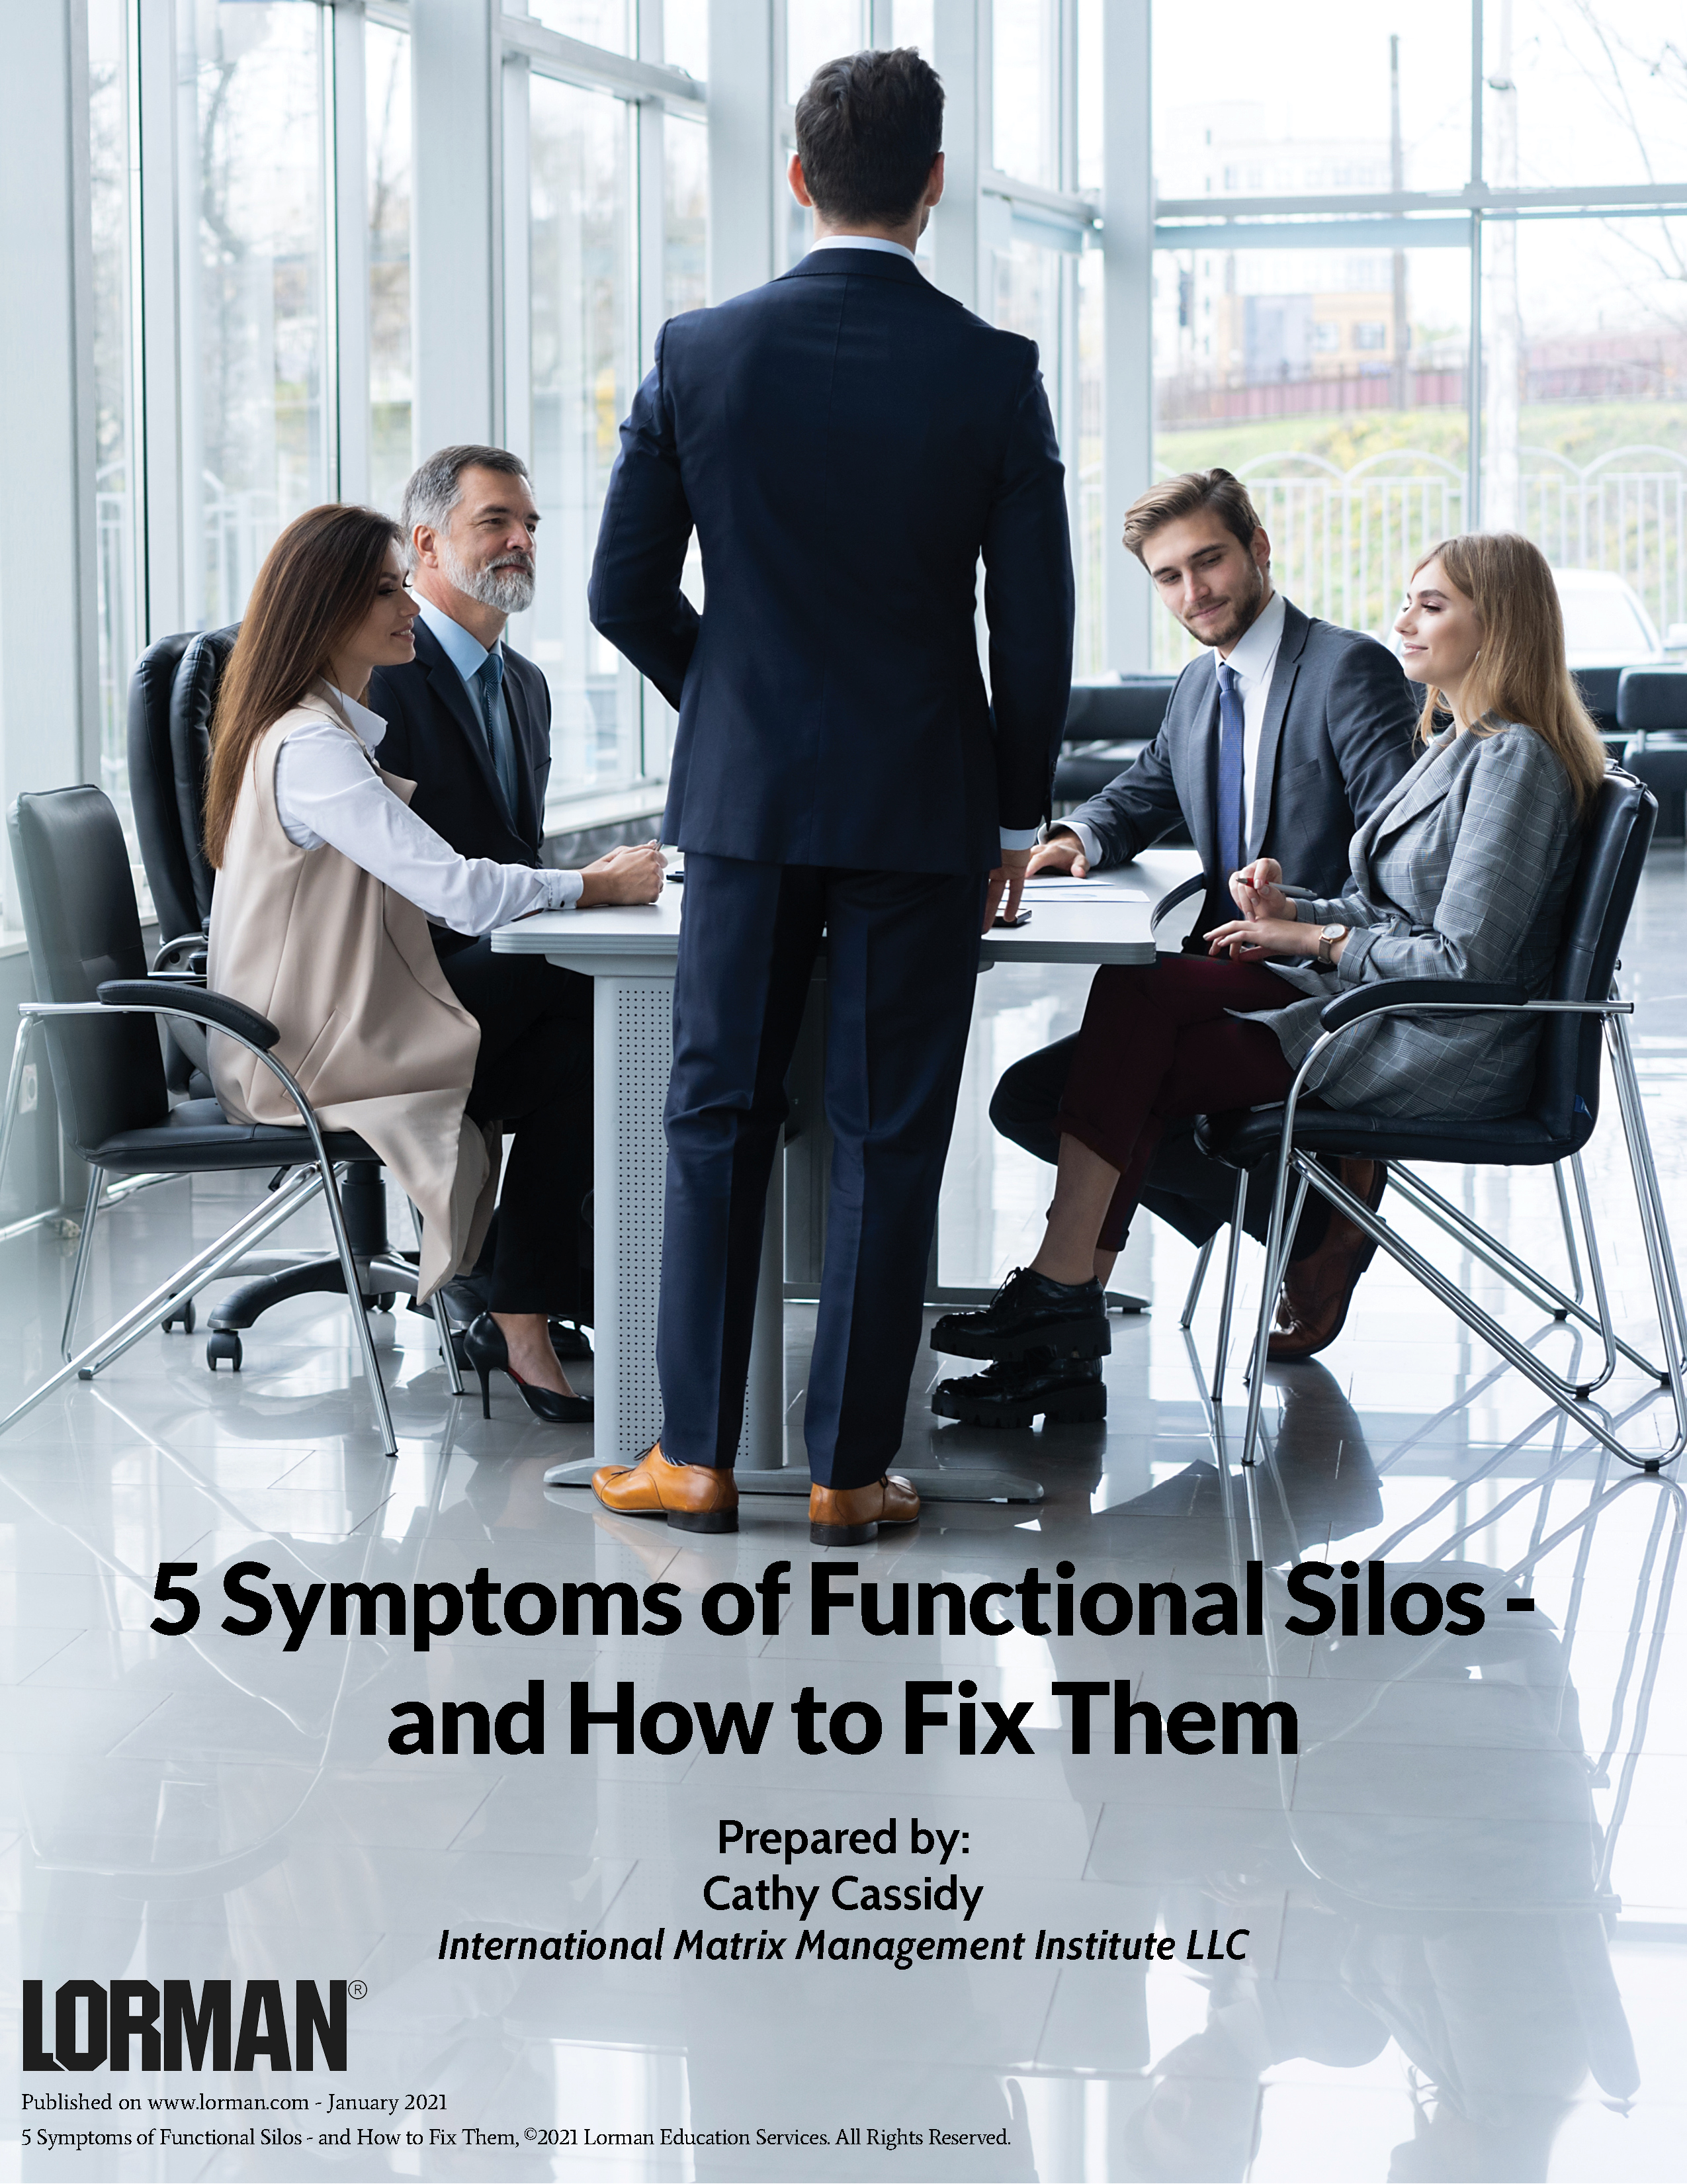 5 Symptoms of Functional Silos - and How to Fix Them